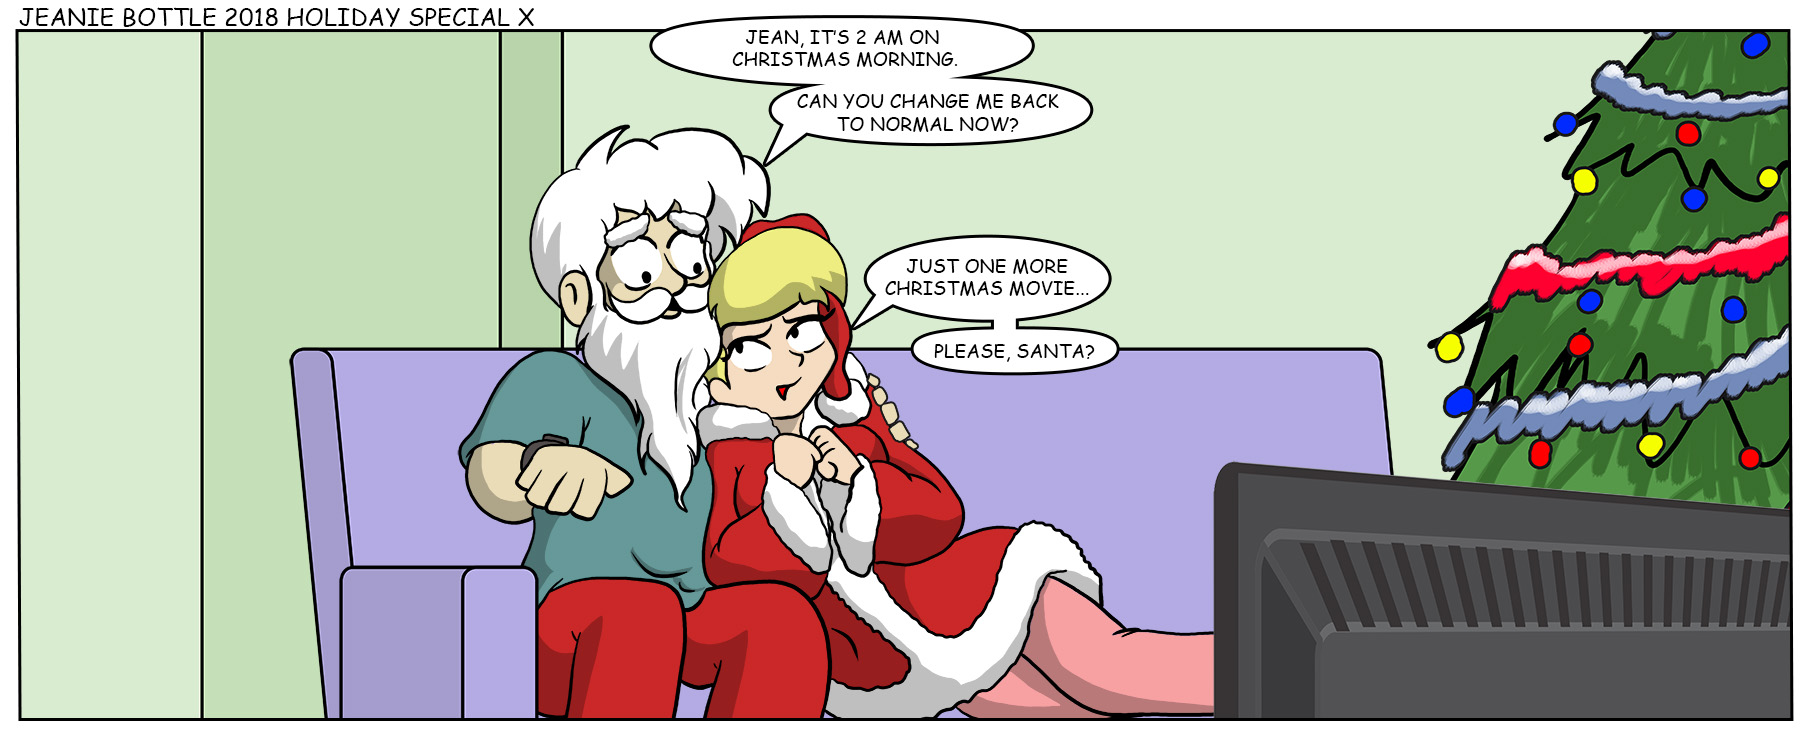 Jeanie Bottle Christmas Special – Page 10